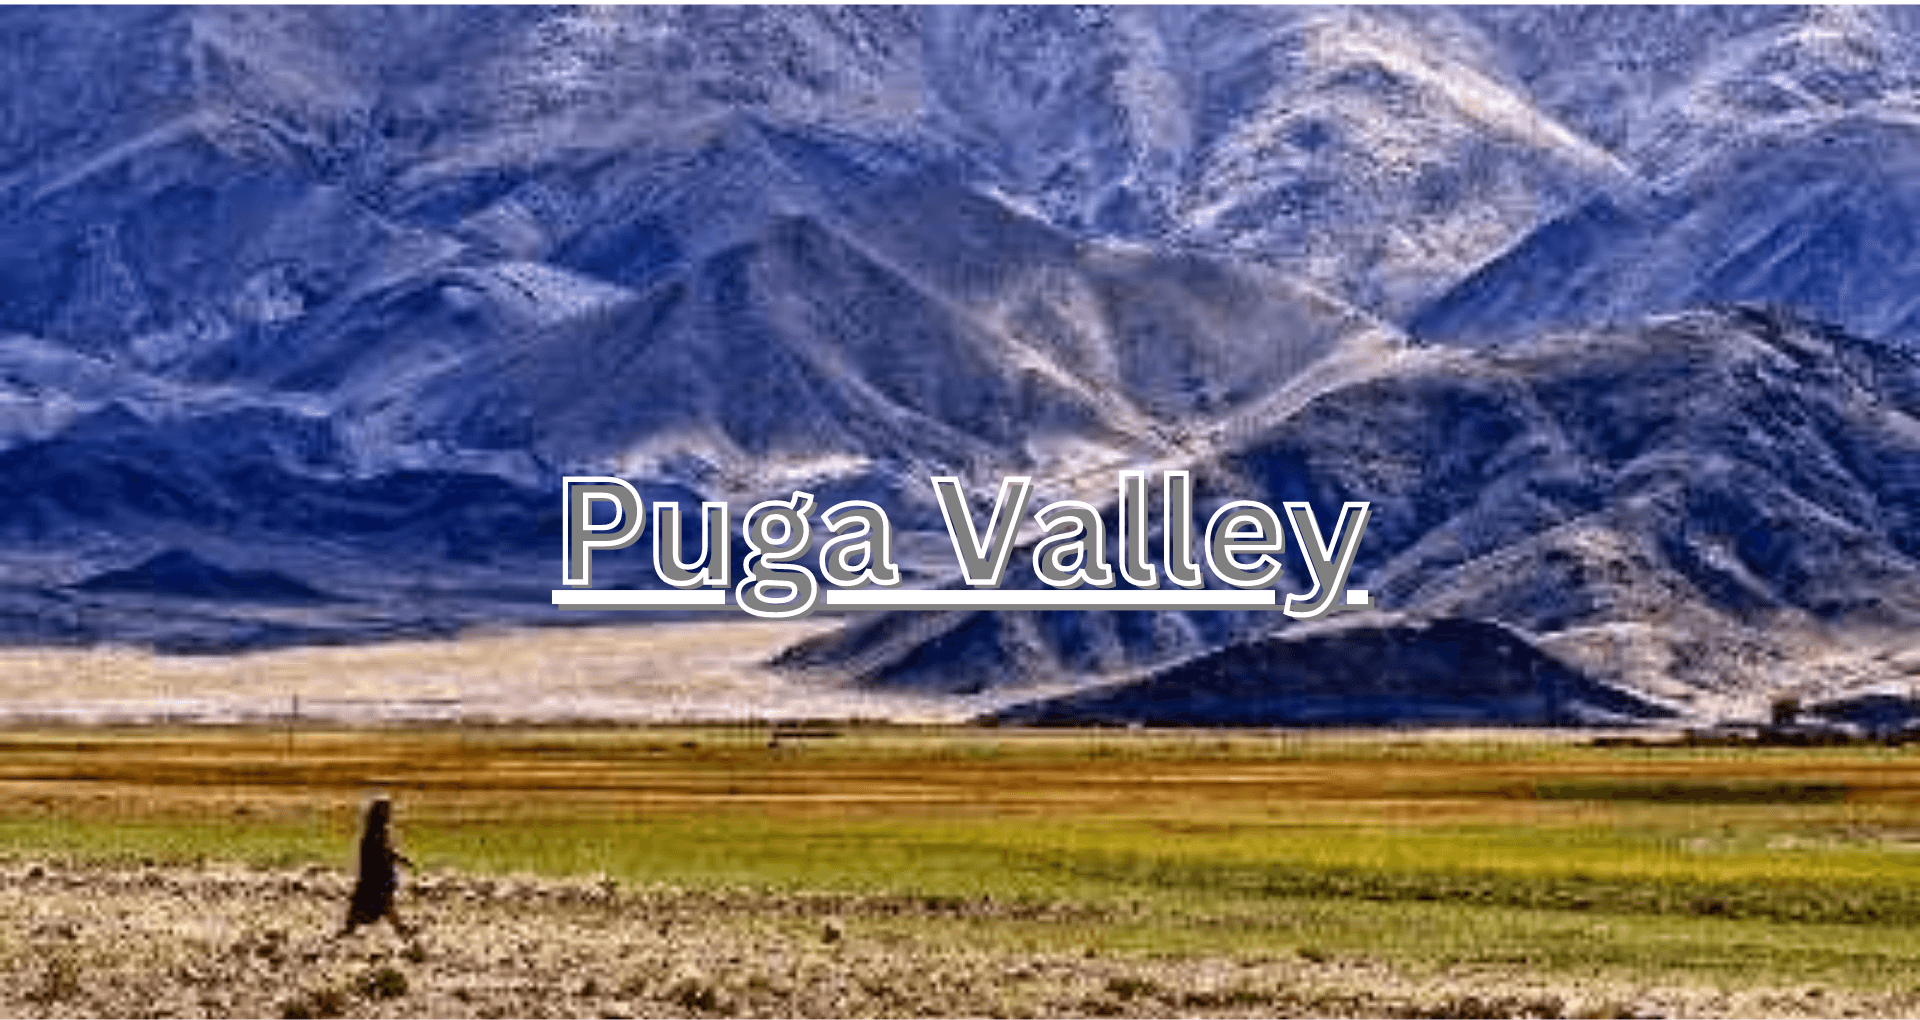 Puga valley, Leh District, Unforgetable experience